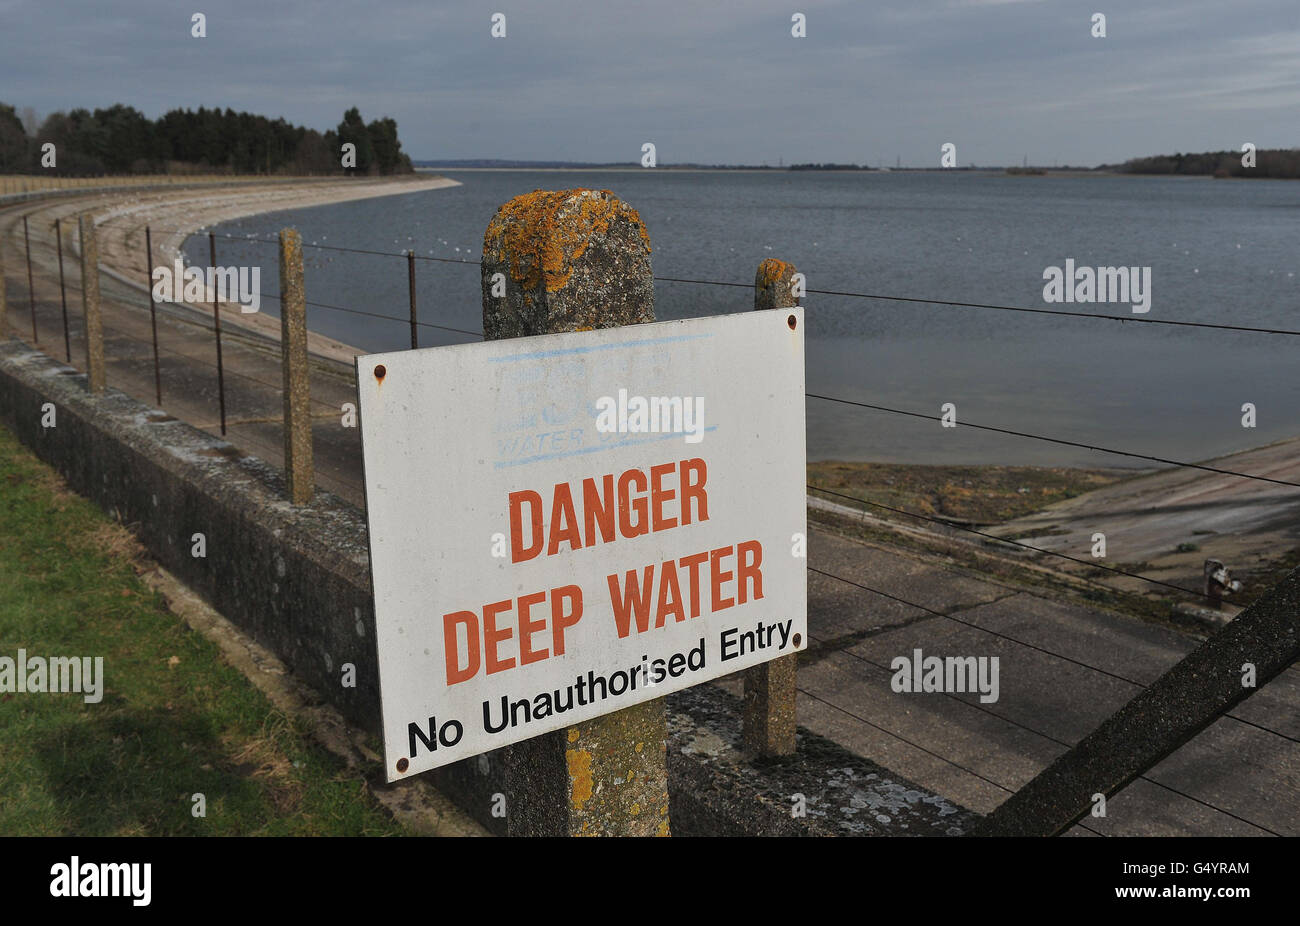 A general view of Hanningfield Reservoir, near Stock in Essex, managed by Essex and Suffolk Water. The south east of England is now in a state of drought, the Department for Environment, Food and Rural Affairs said today. Stock Photo